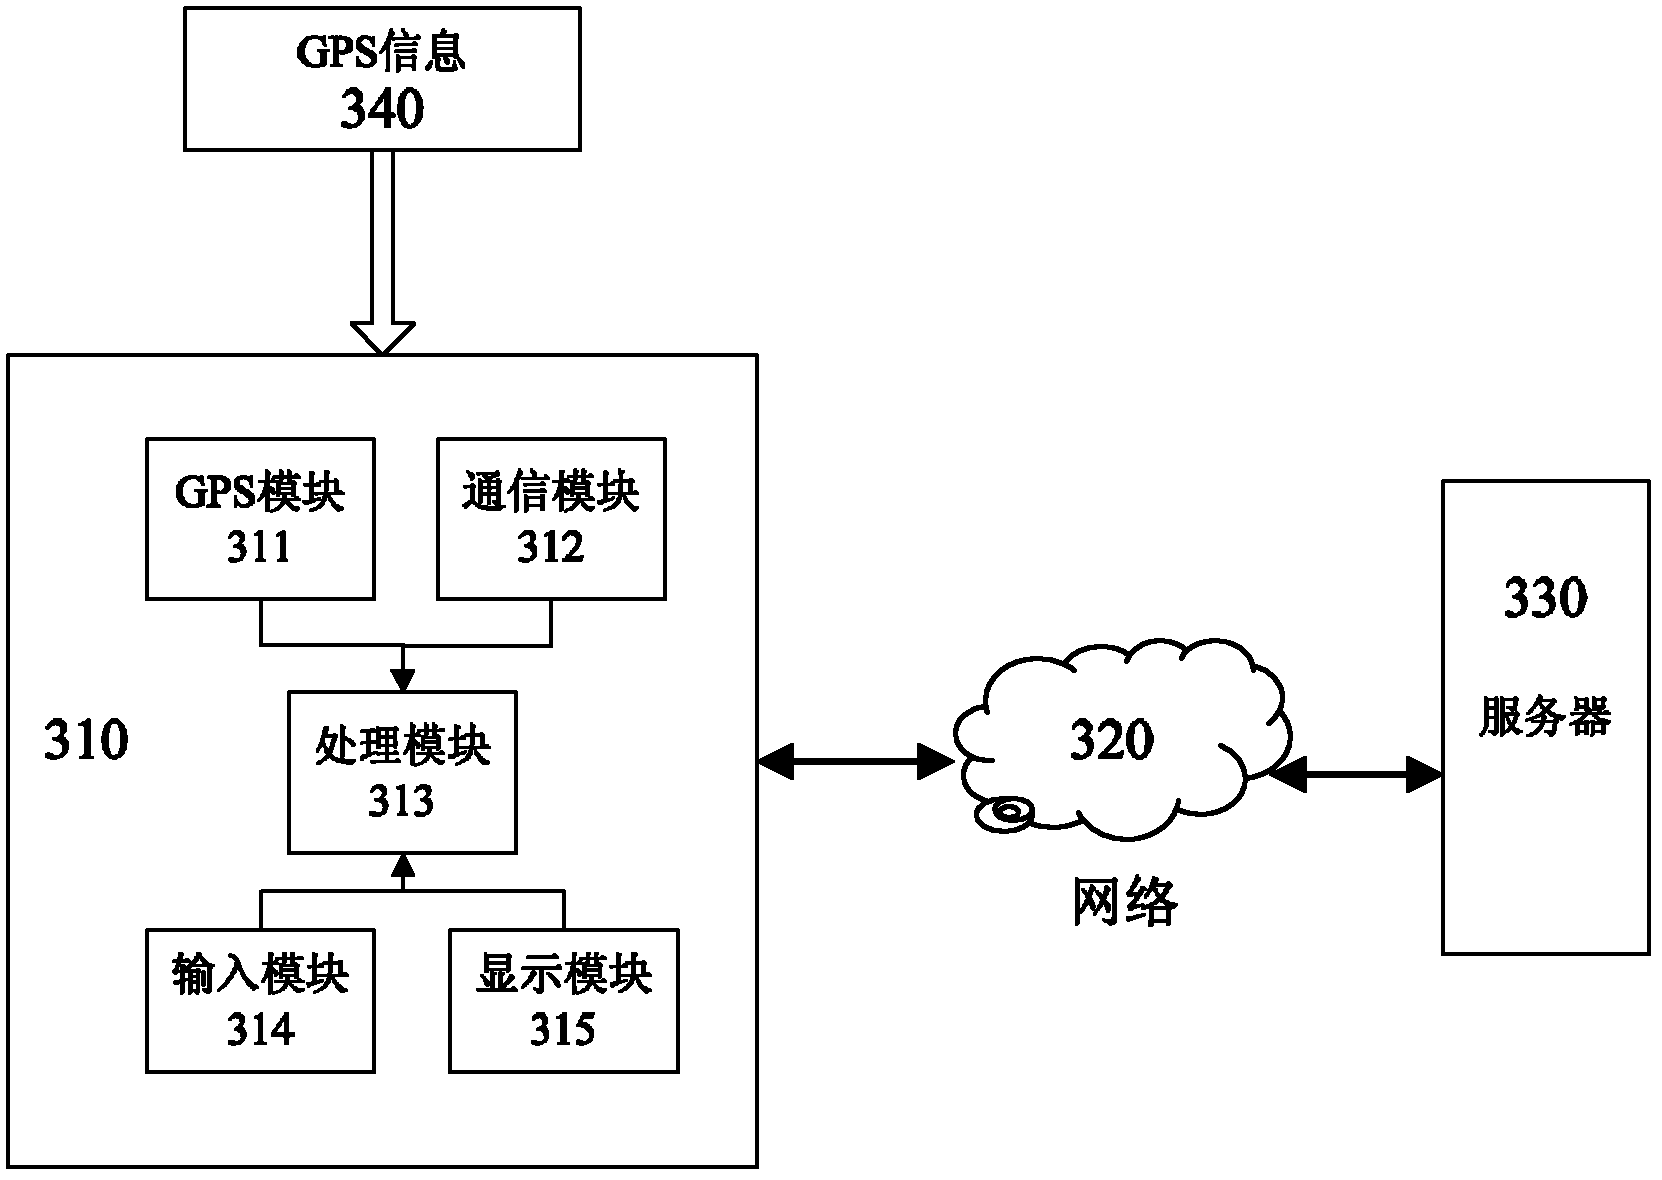 Method and system based on mobile social network application